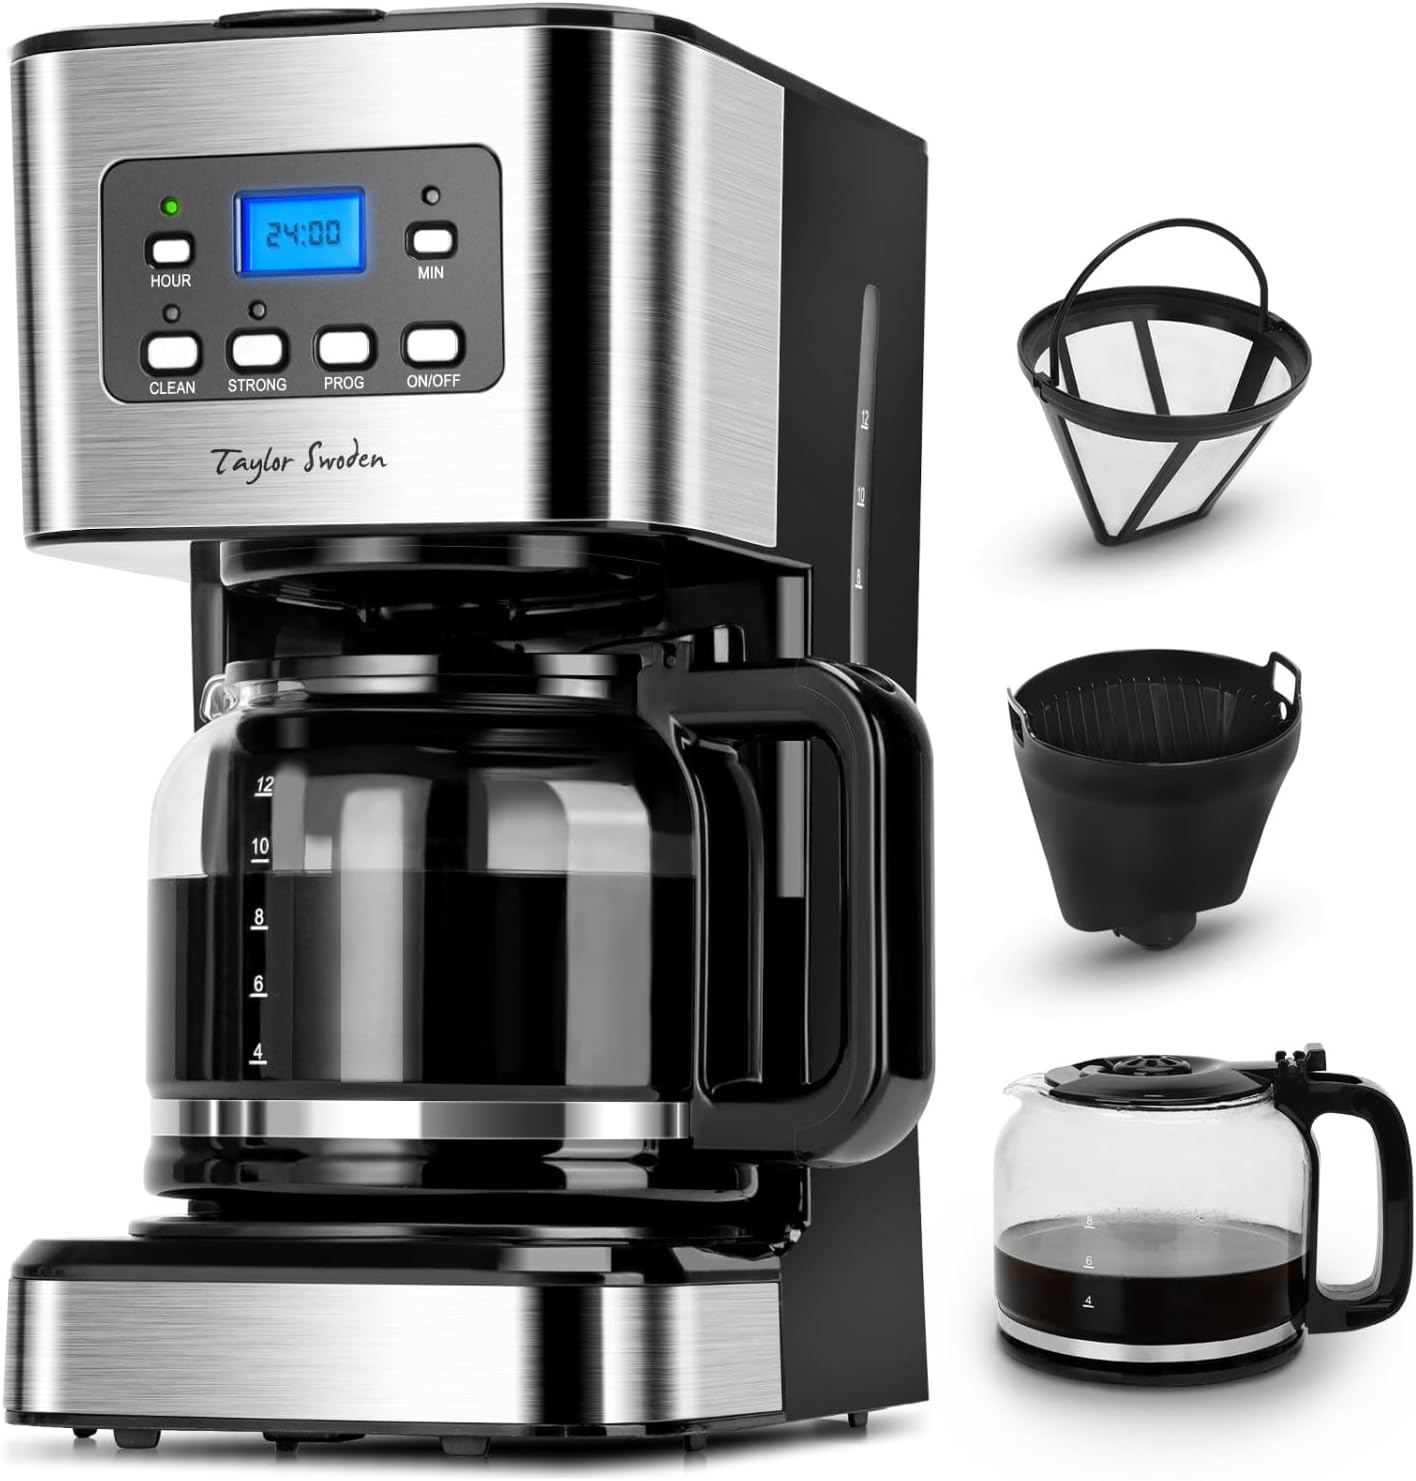 Taylor Swoden Darcy 950 W Coffee Machine With Timer, 1.5 l Filter Coffee Machine, 12 Cups, Automatic Shut-Off, Drip Stop, Reusable Filter and Heating Plate, BPA-Free, Black